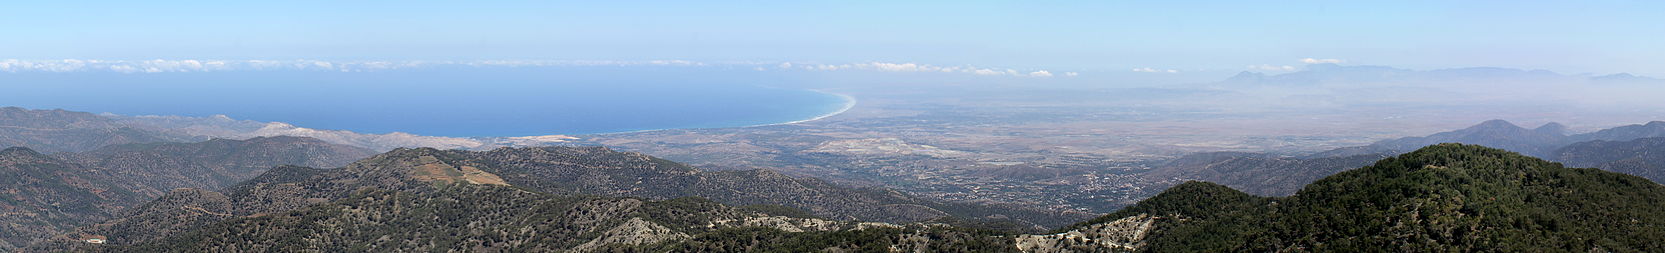 Panoramic view of the Guzelyurt District, and the Morphou Bay. Morphou Bay.jpg